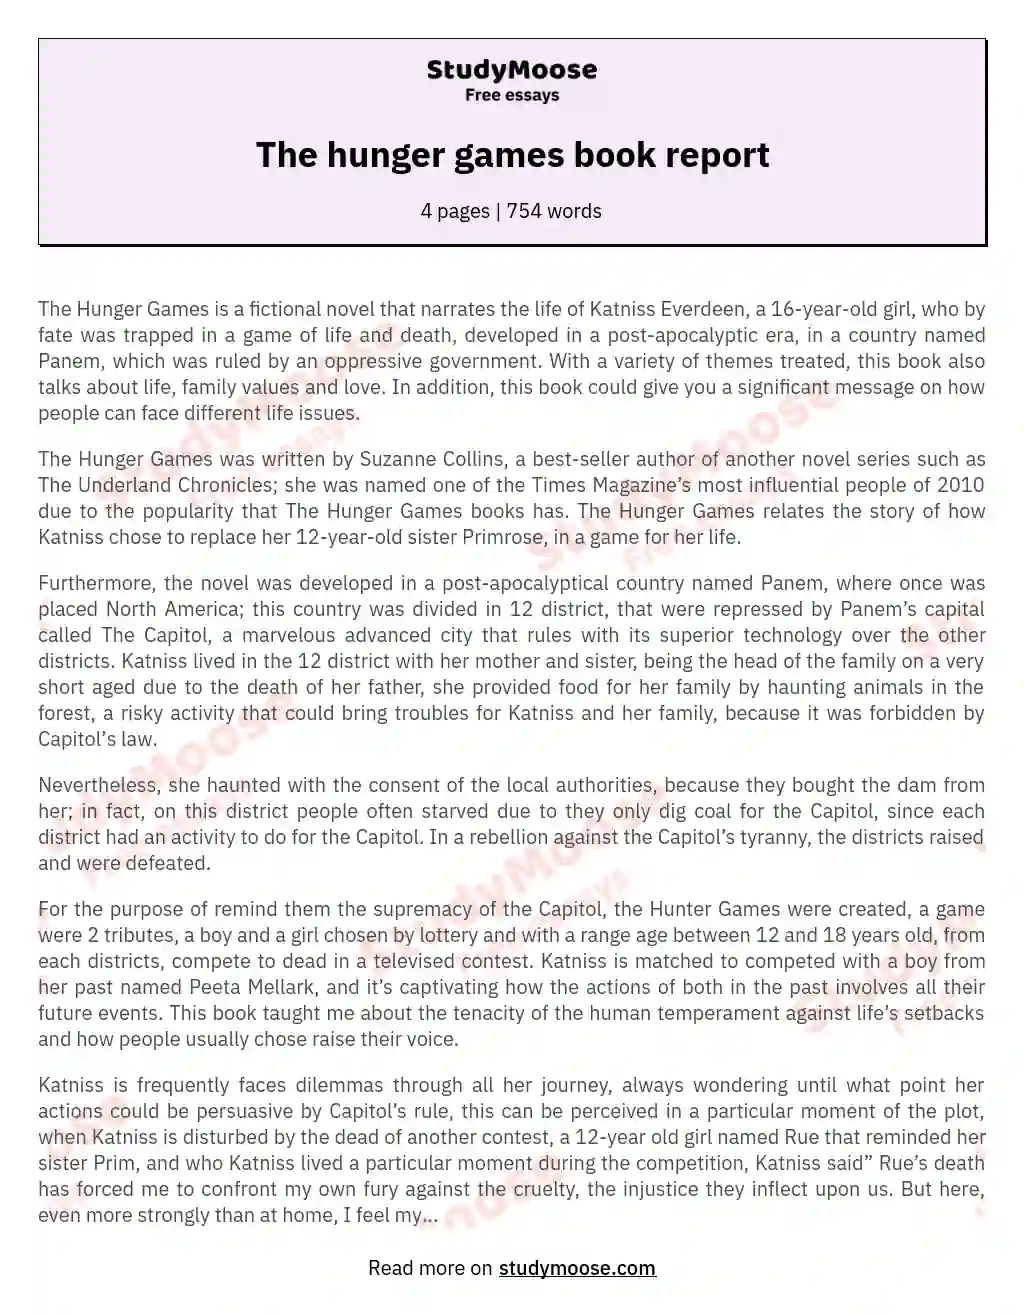 The hunger games book report essay